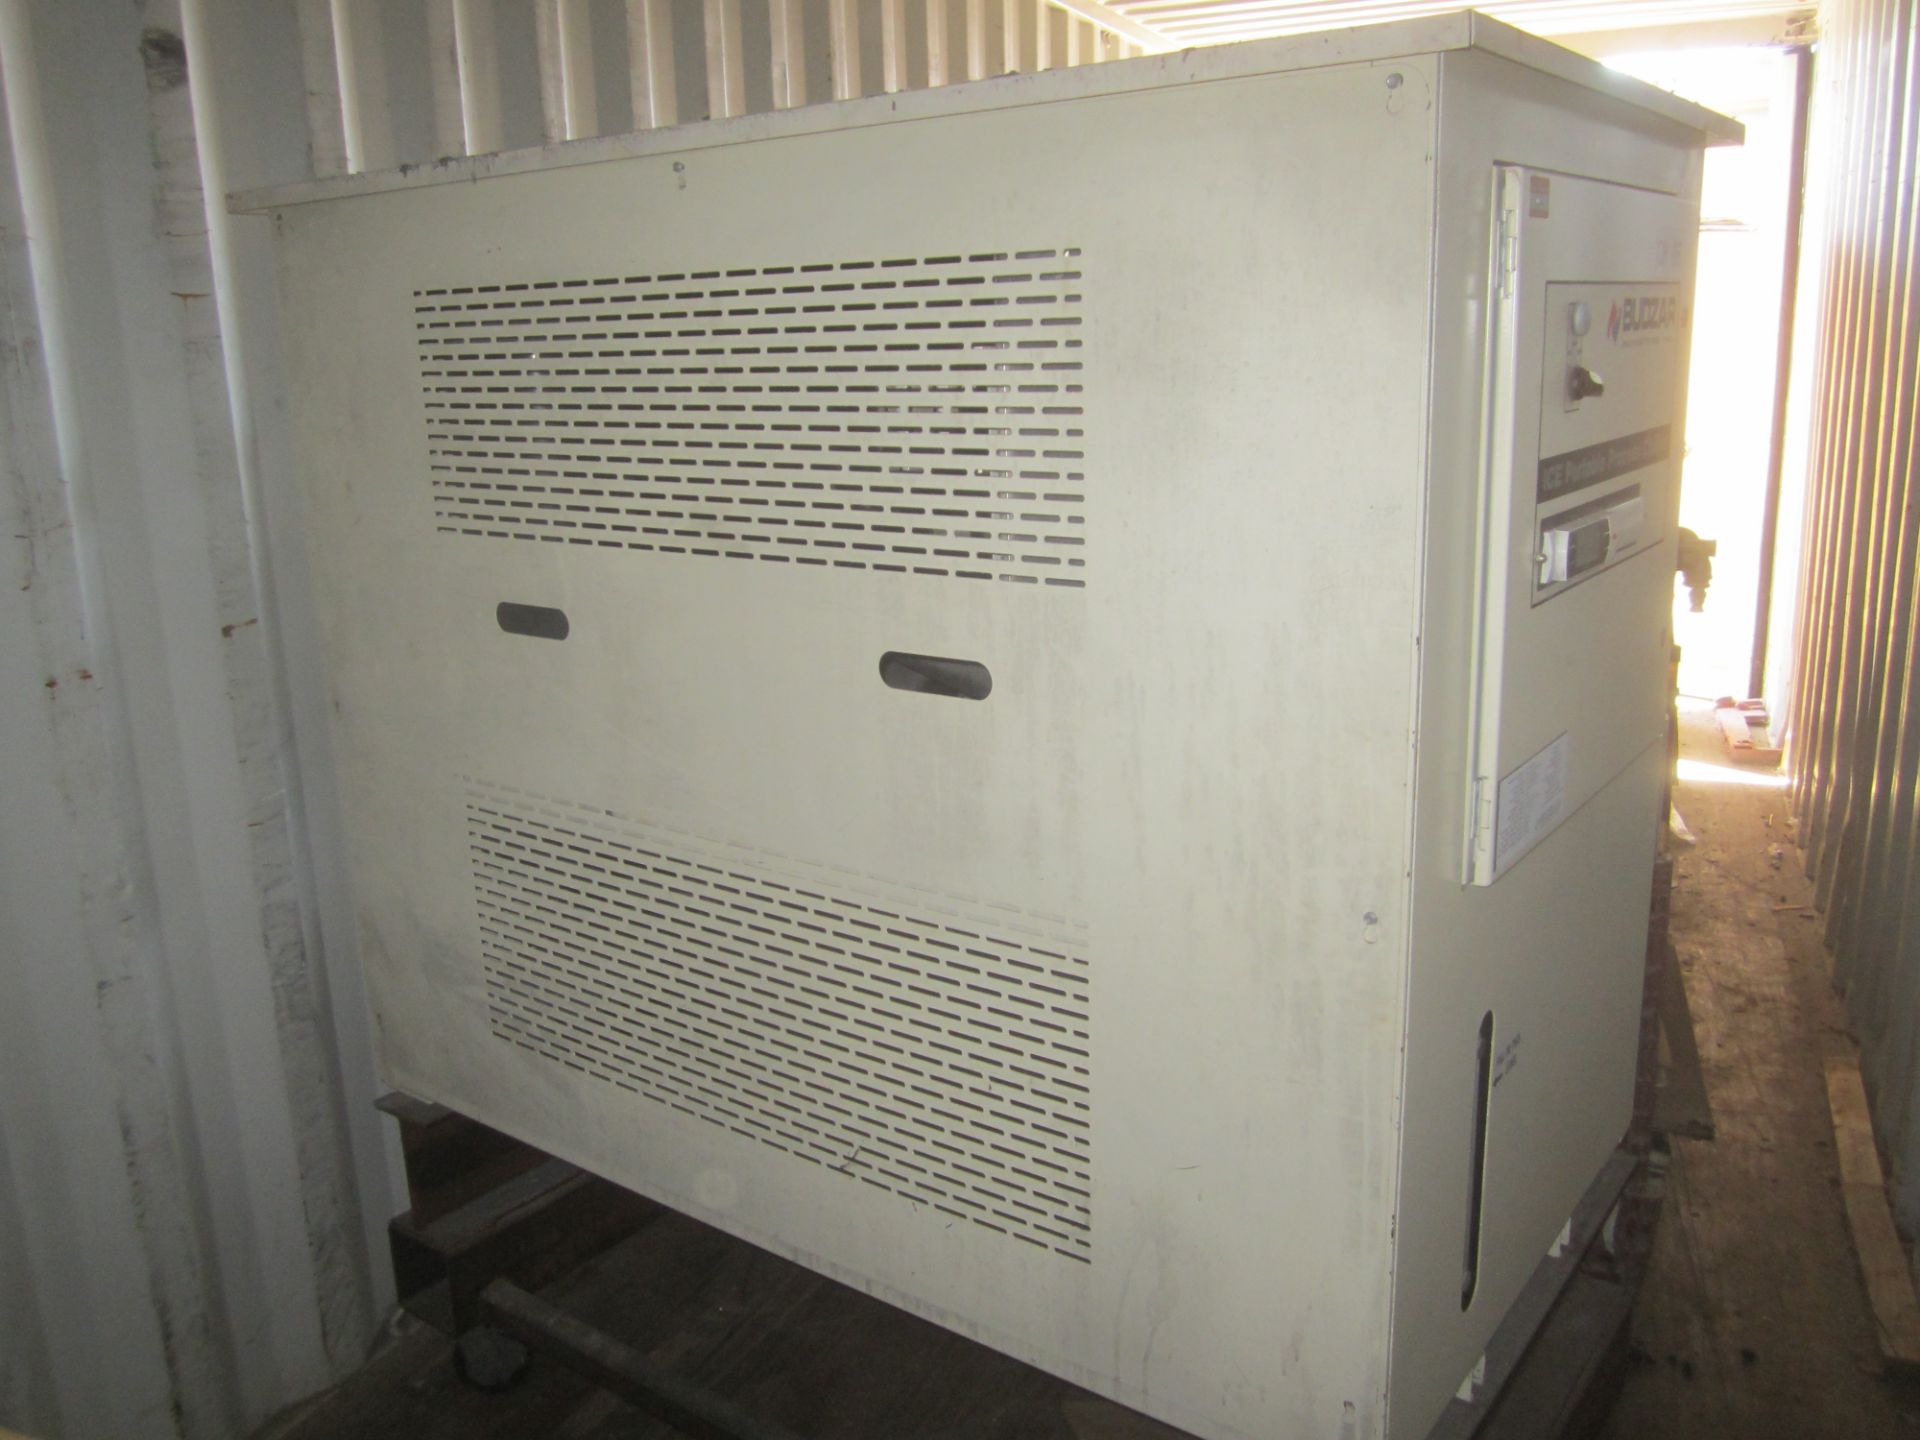 Budzar Model WC-15-FCB-36-5-000 Water Cooled Portable Chiller, s/n 201908-36970, 460/3/60 - Image 2 of 4